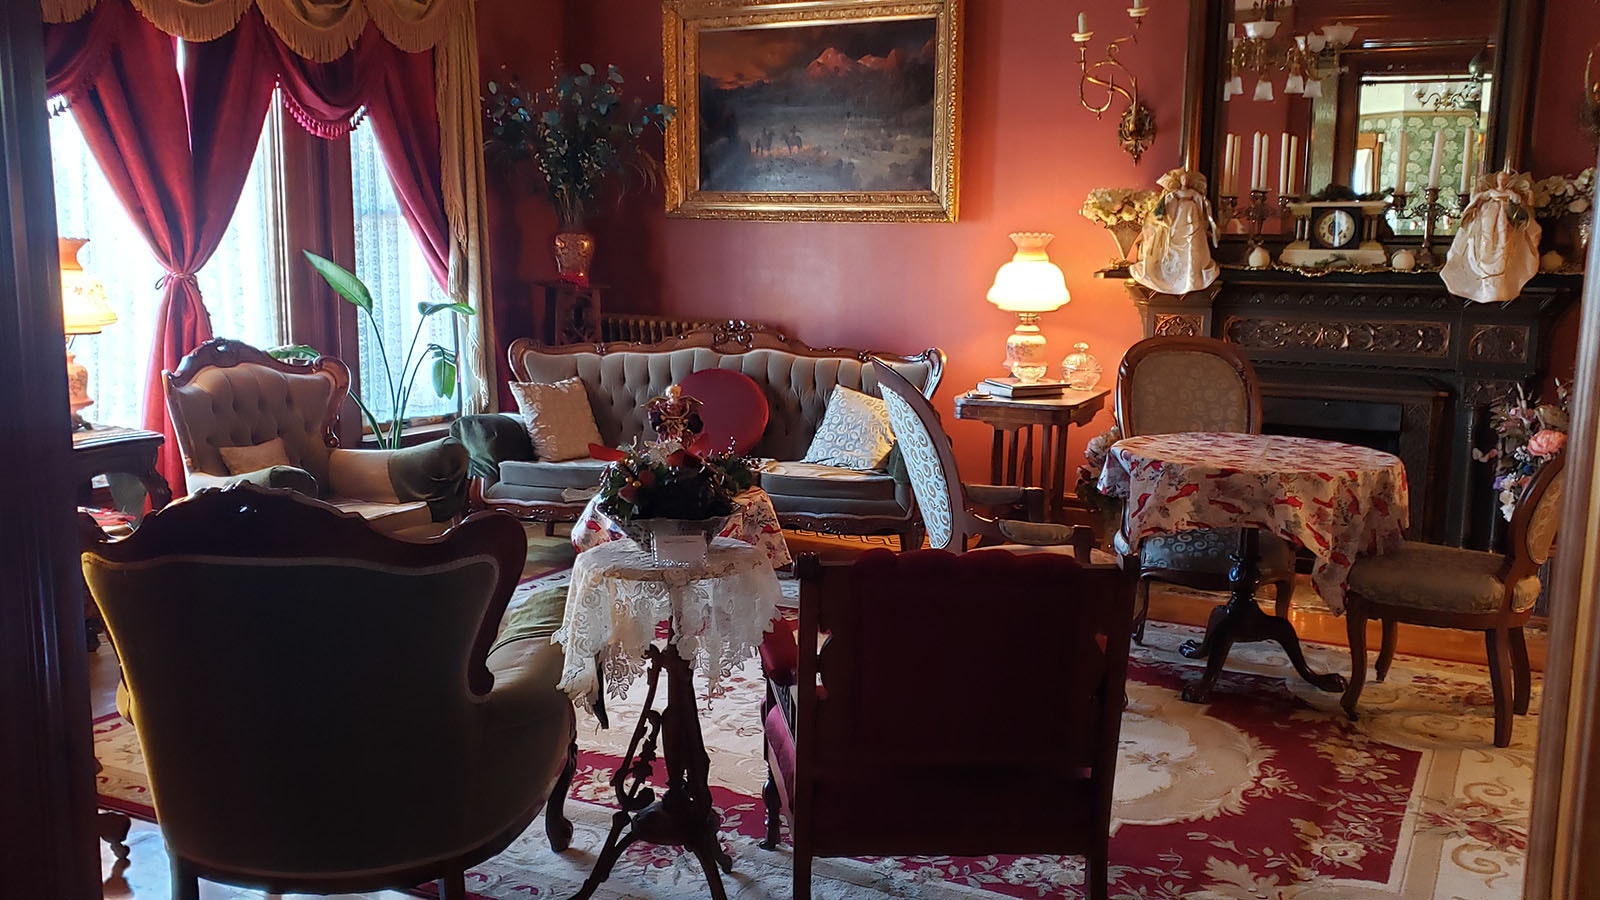 The war room at the Nagle-Warren mansion where Sen. F.E. Warren, Buffalo Bill Cody, William Howard Taft and Gen. John J. Pershing would talk military and political strategies important not just to Wyoming, but the nation.